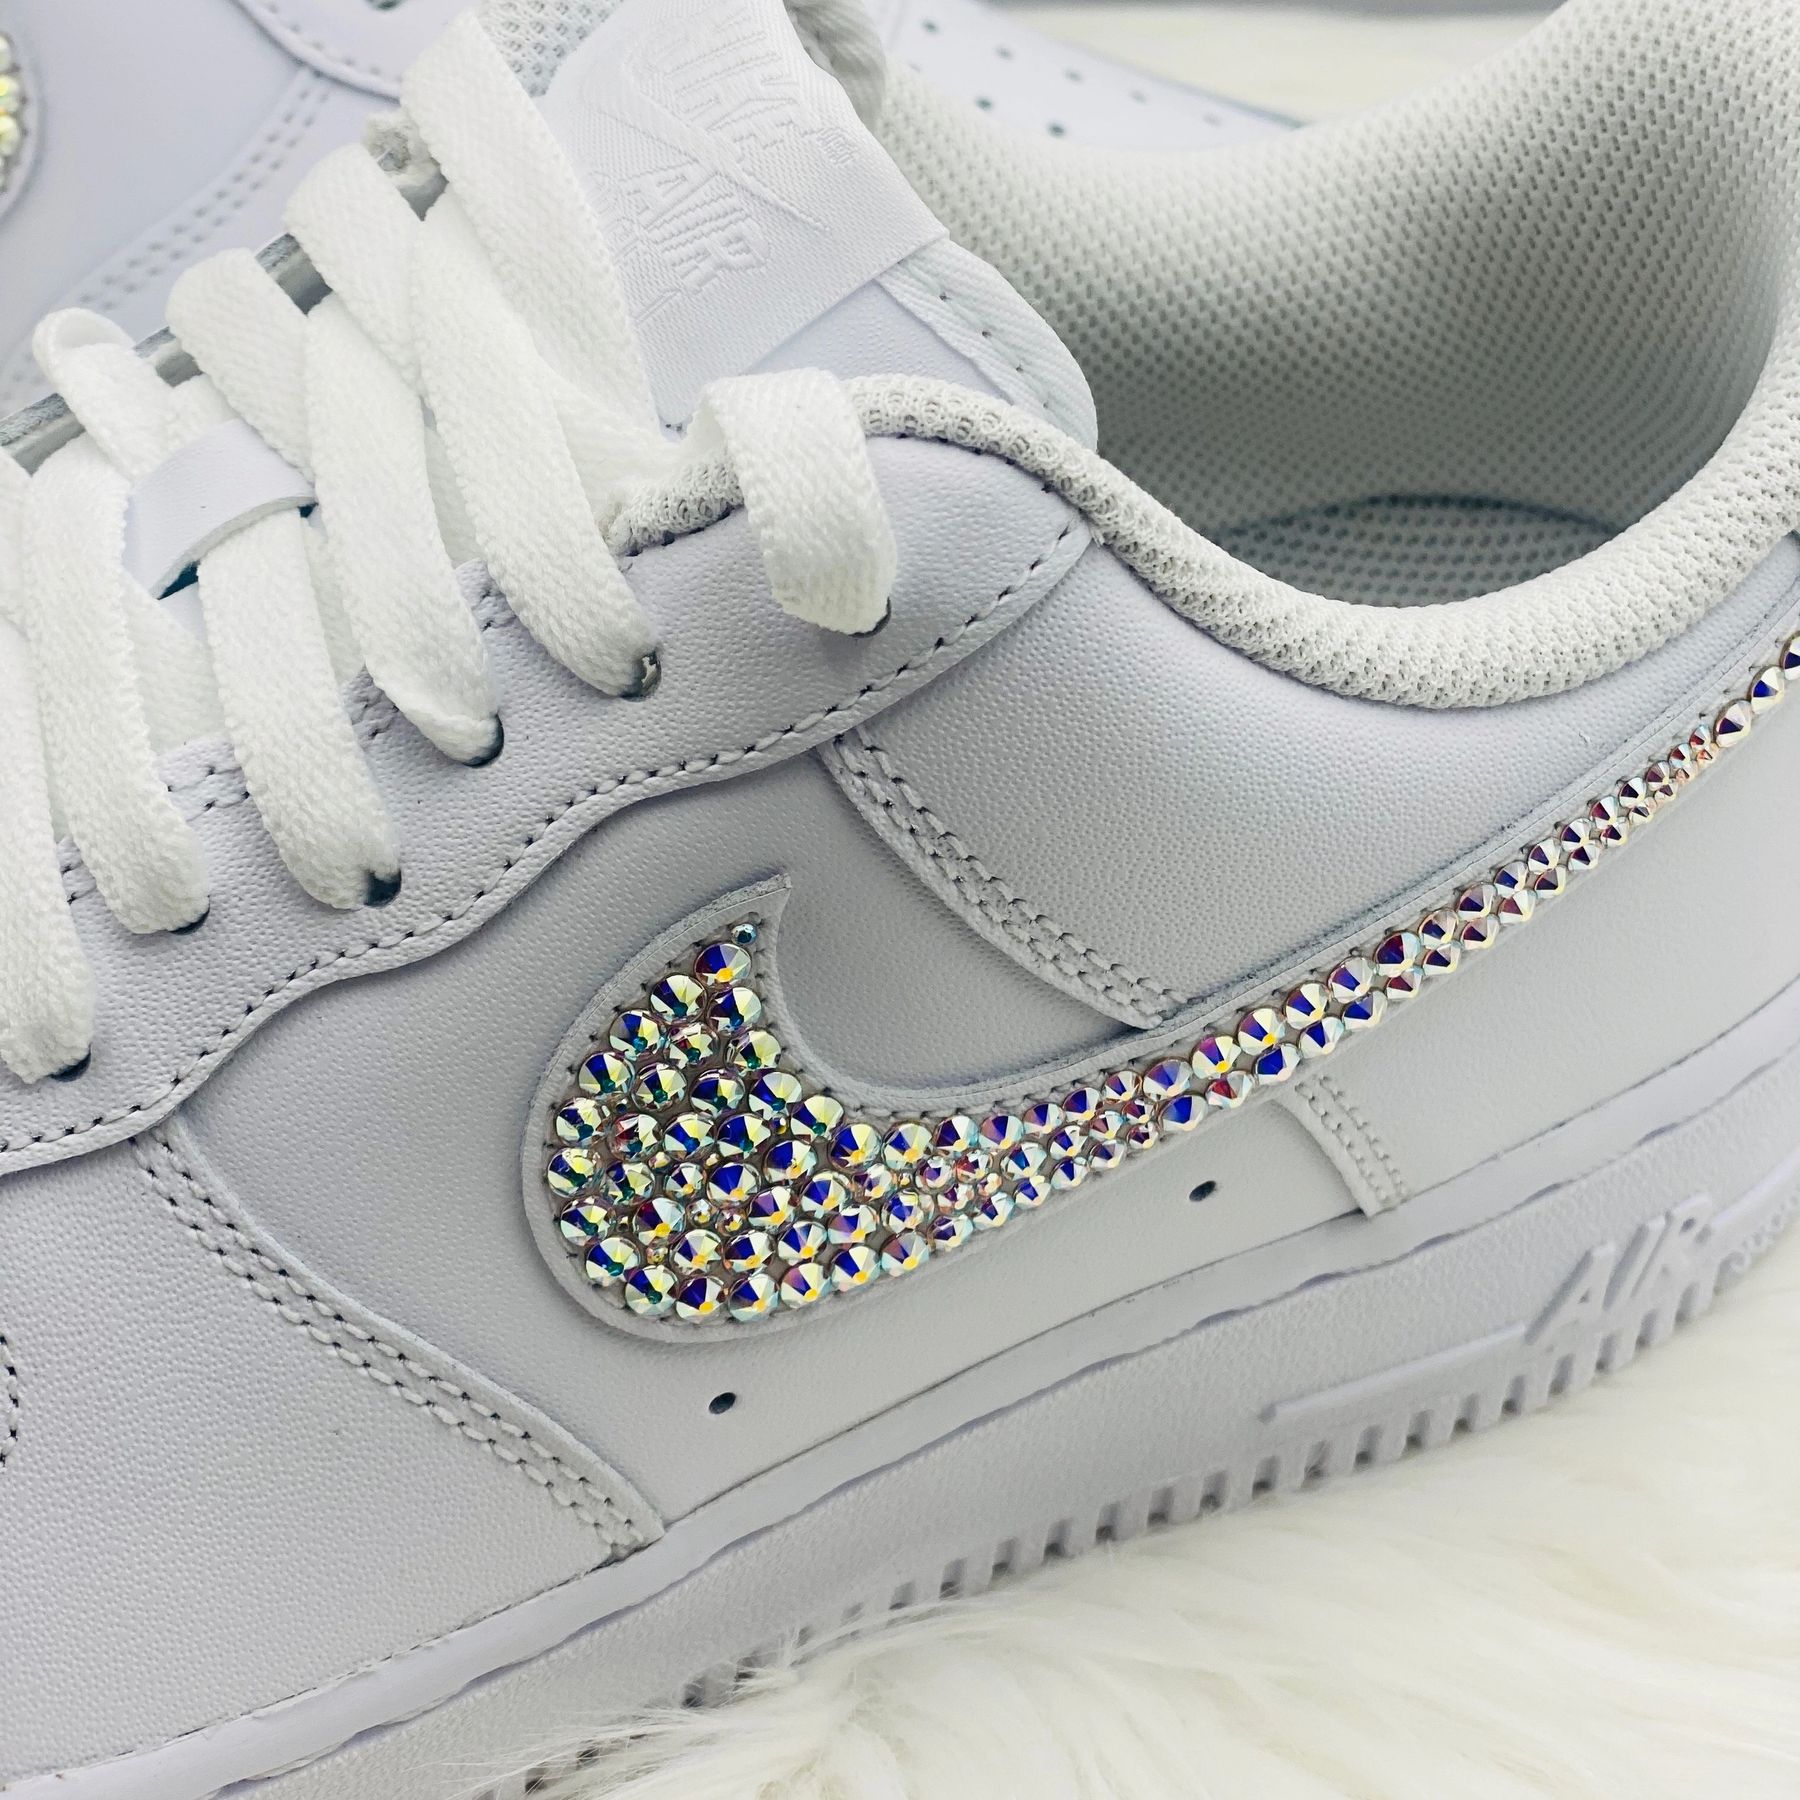 Swarovski Bling Nike Air Force 1 Shoes - Low - White with / Iridescent Rhinestones